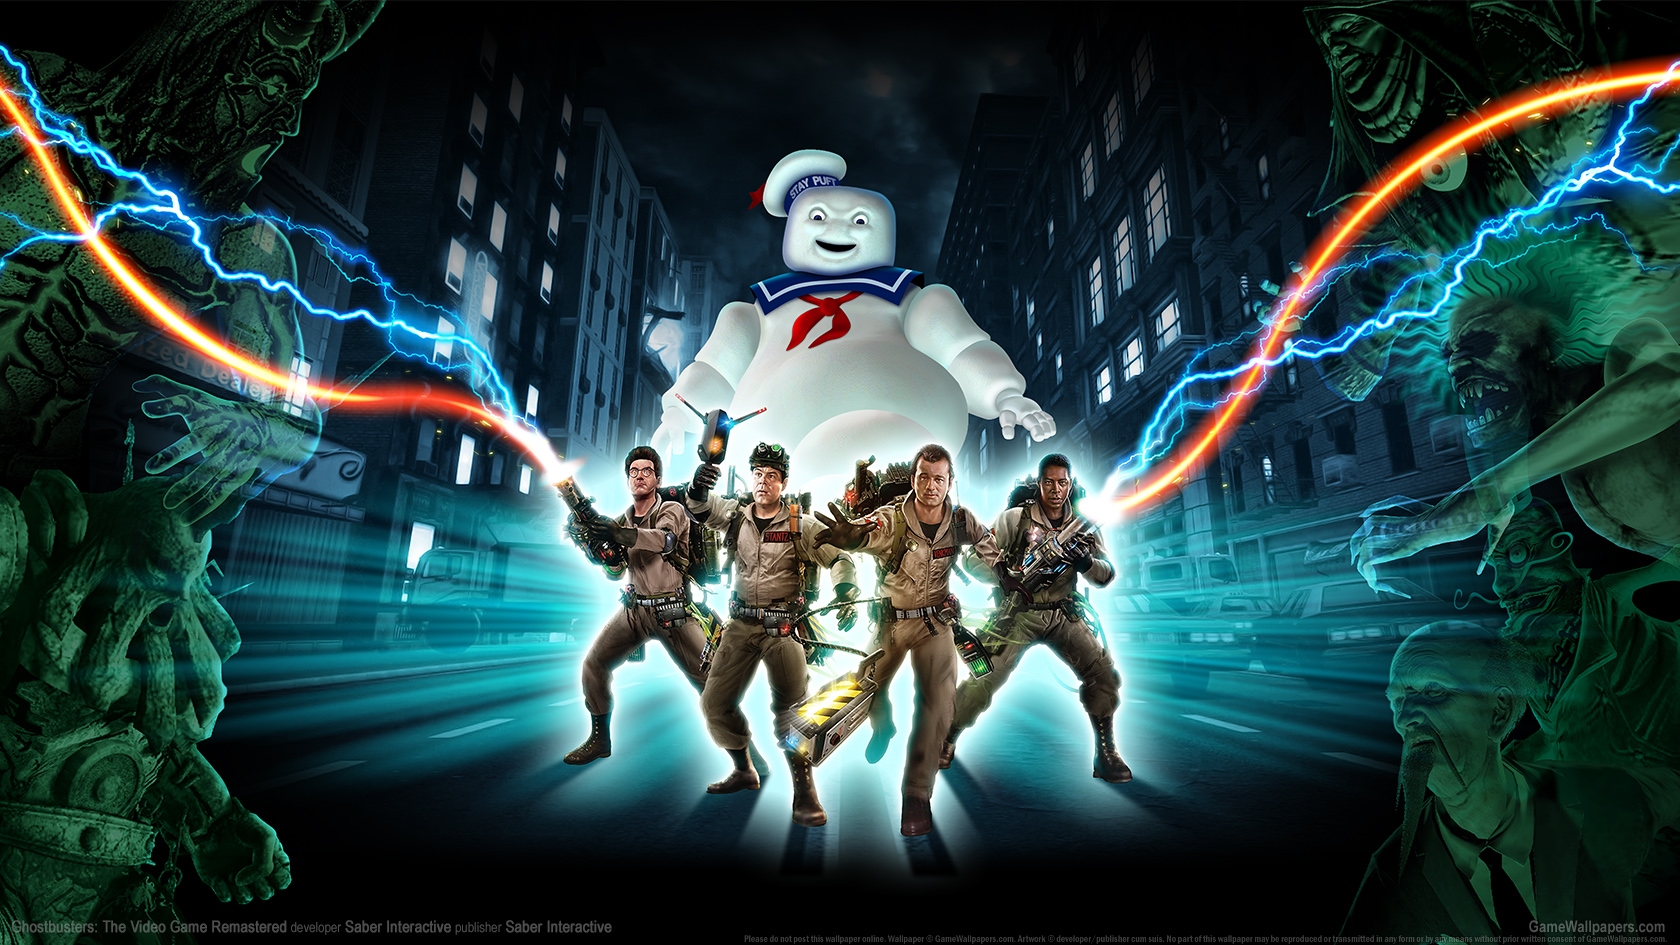 Ghostbusters: The Video Game Remastered 1680x945 fond d'cran 01